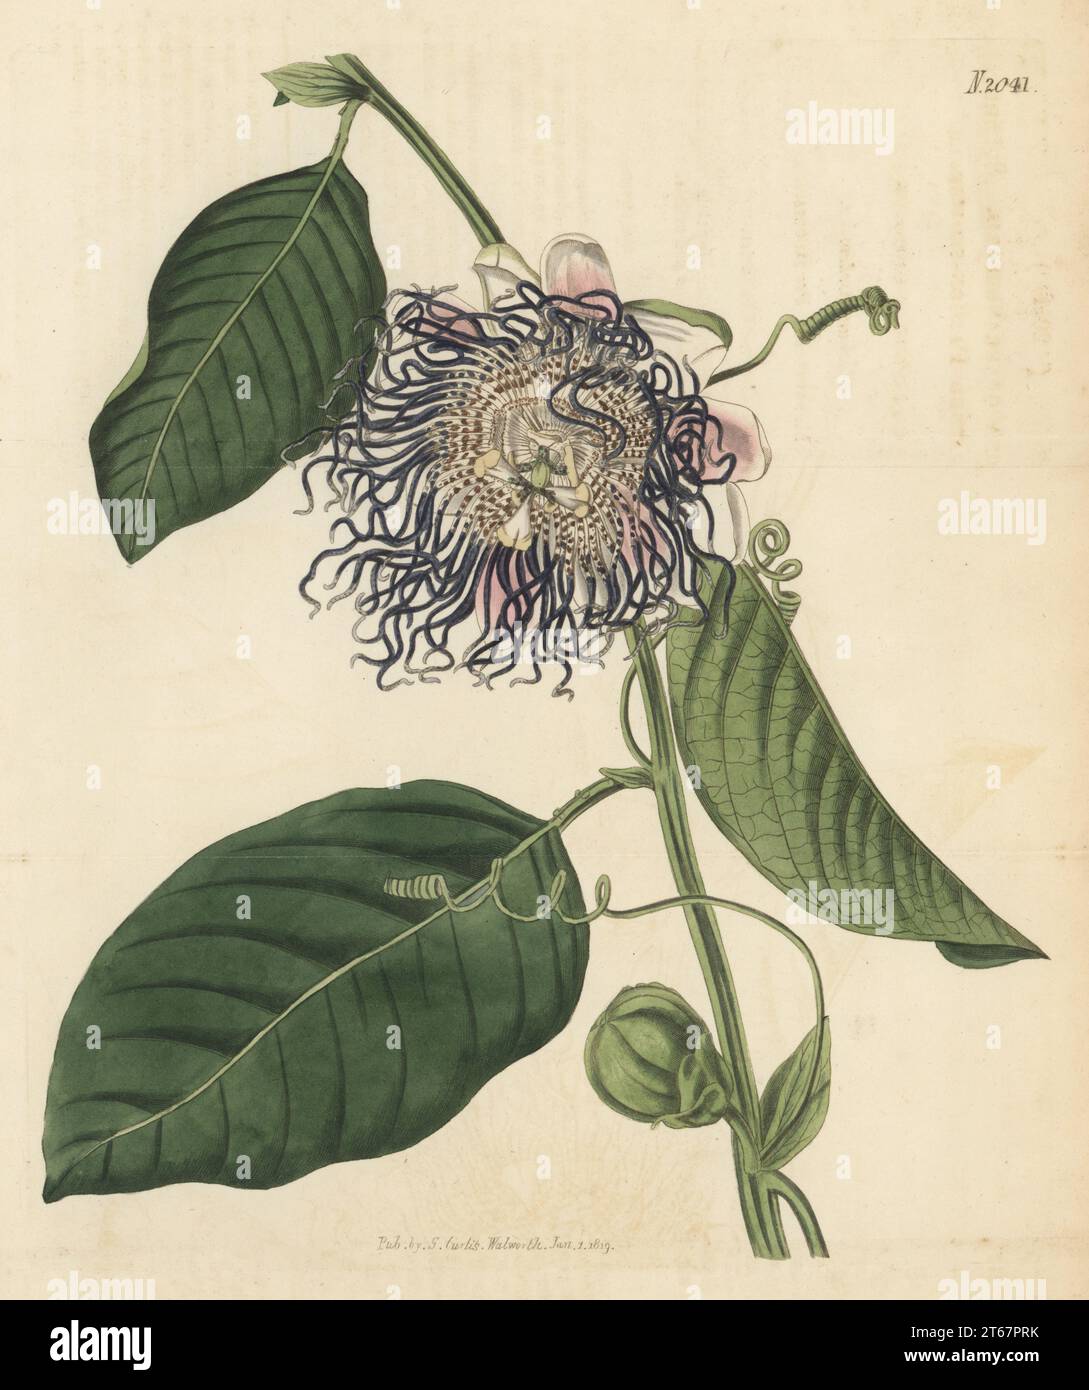 Giant granadilla, barbadine, grenadine, giant tumbo or badea, Native to the West Indies, communicated from the herbarium collection of James Vere, Kensington Gore. Square-stalked passion-flower, Passiflora quadrangularis. Handcoloured copperplate engraving by Weddell after a botanical illustration by an unknown artist from Curtis’s Botanical Magazine, edited by John Sims, London, 1819. Stock Photo